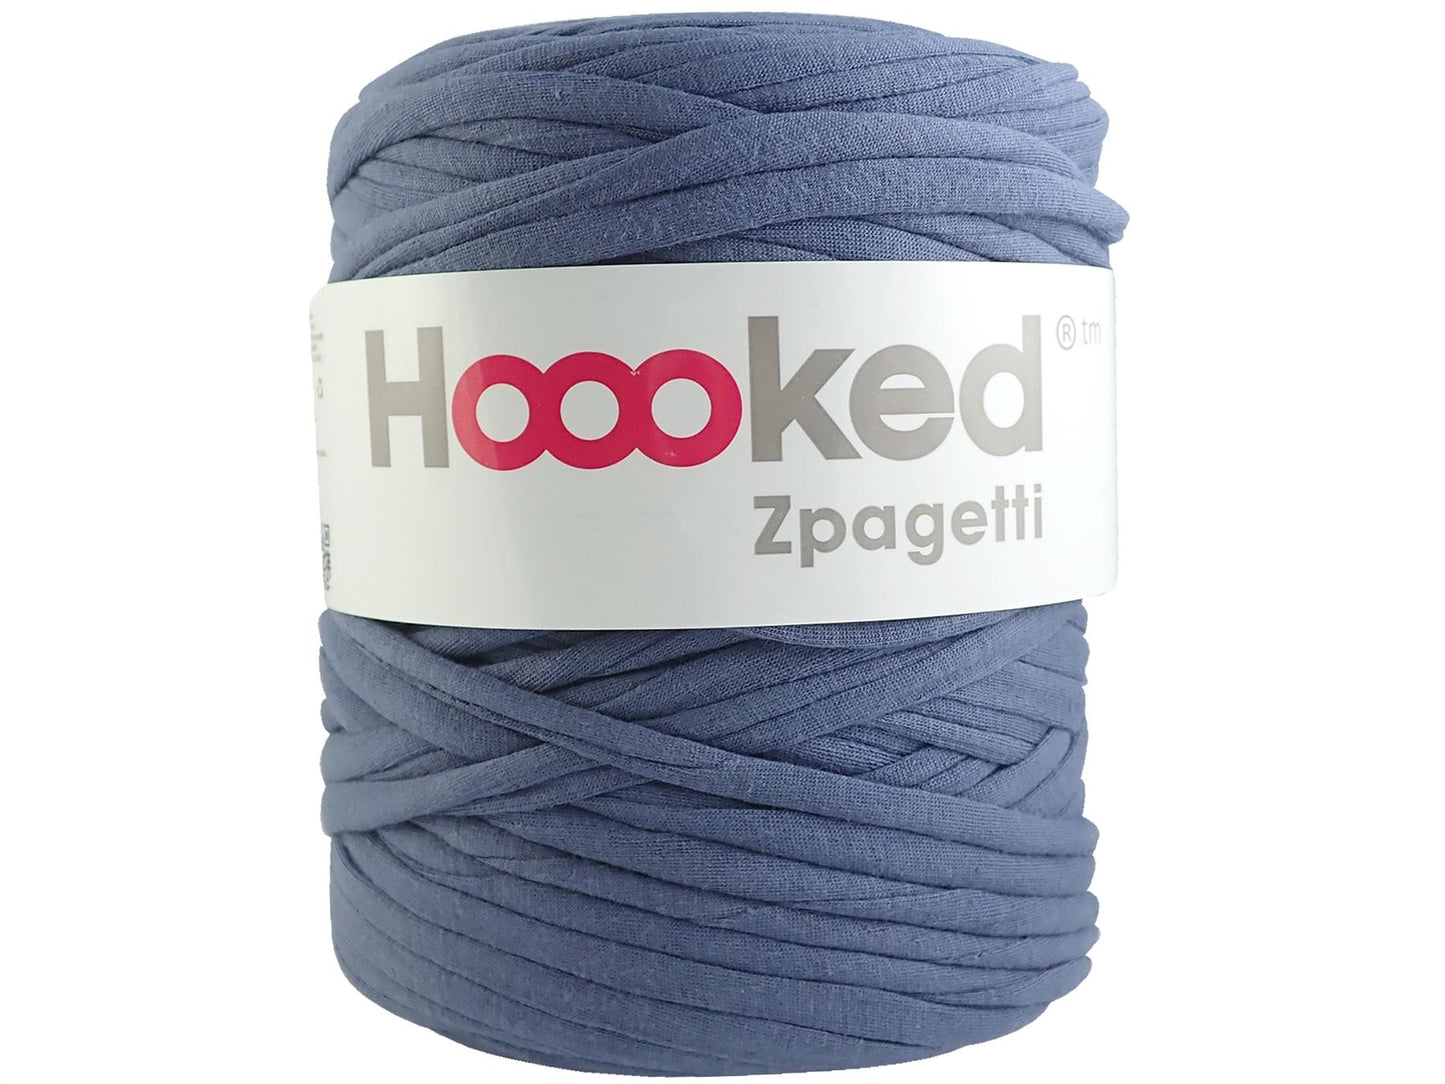 Hoooked Zpagetti Vintage Blue Cotton T-Shirt Yarn - 120M 700g